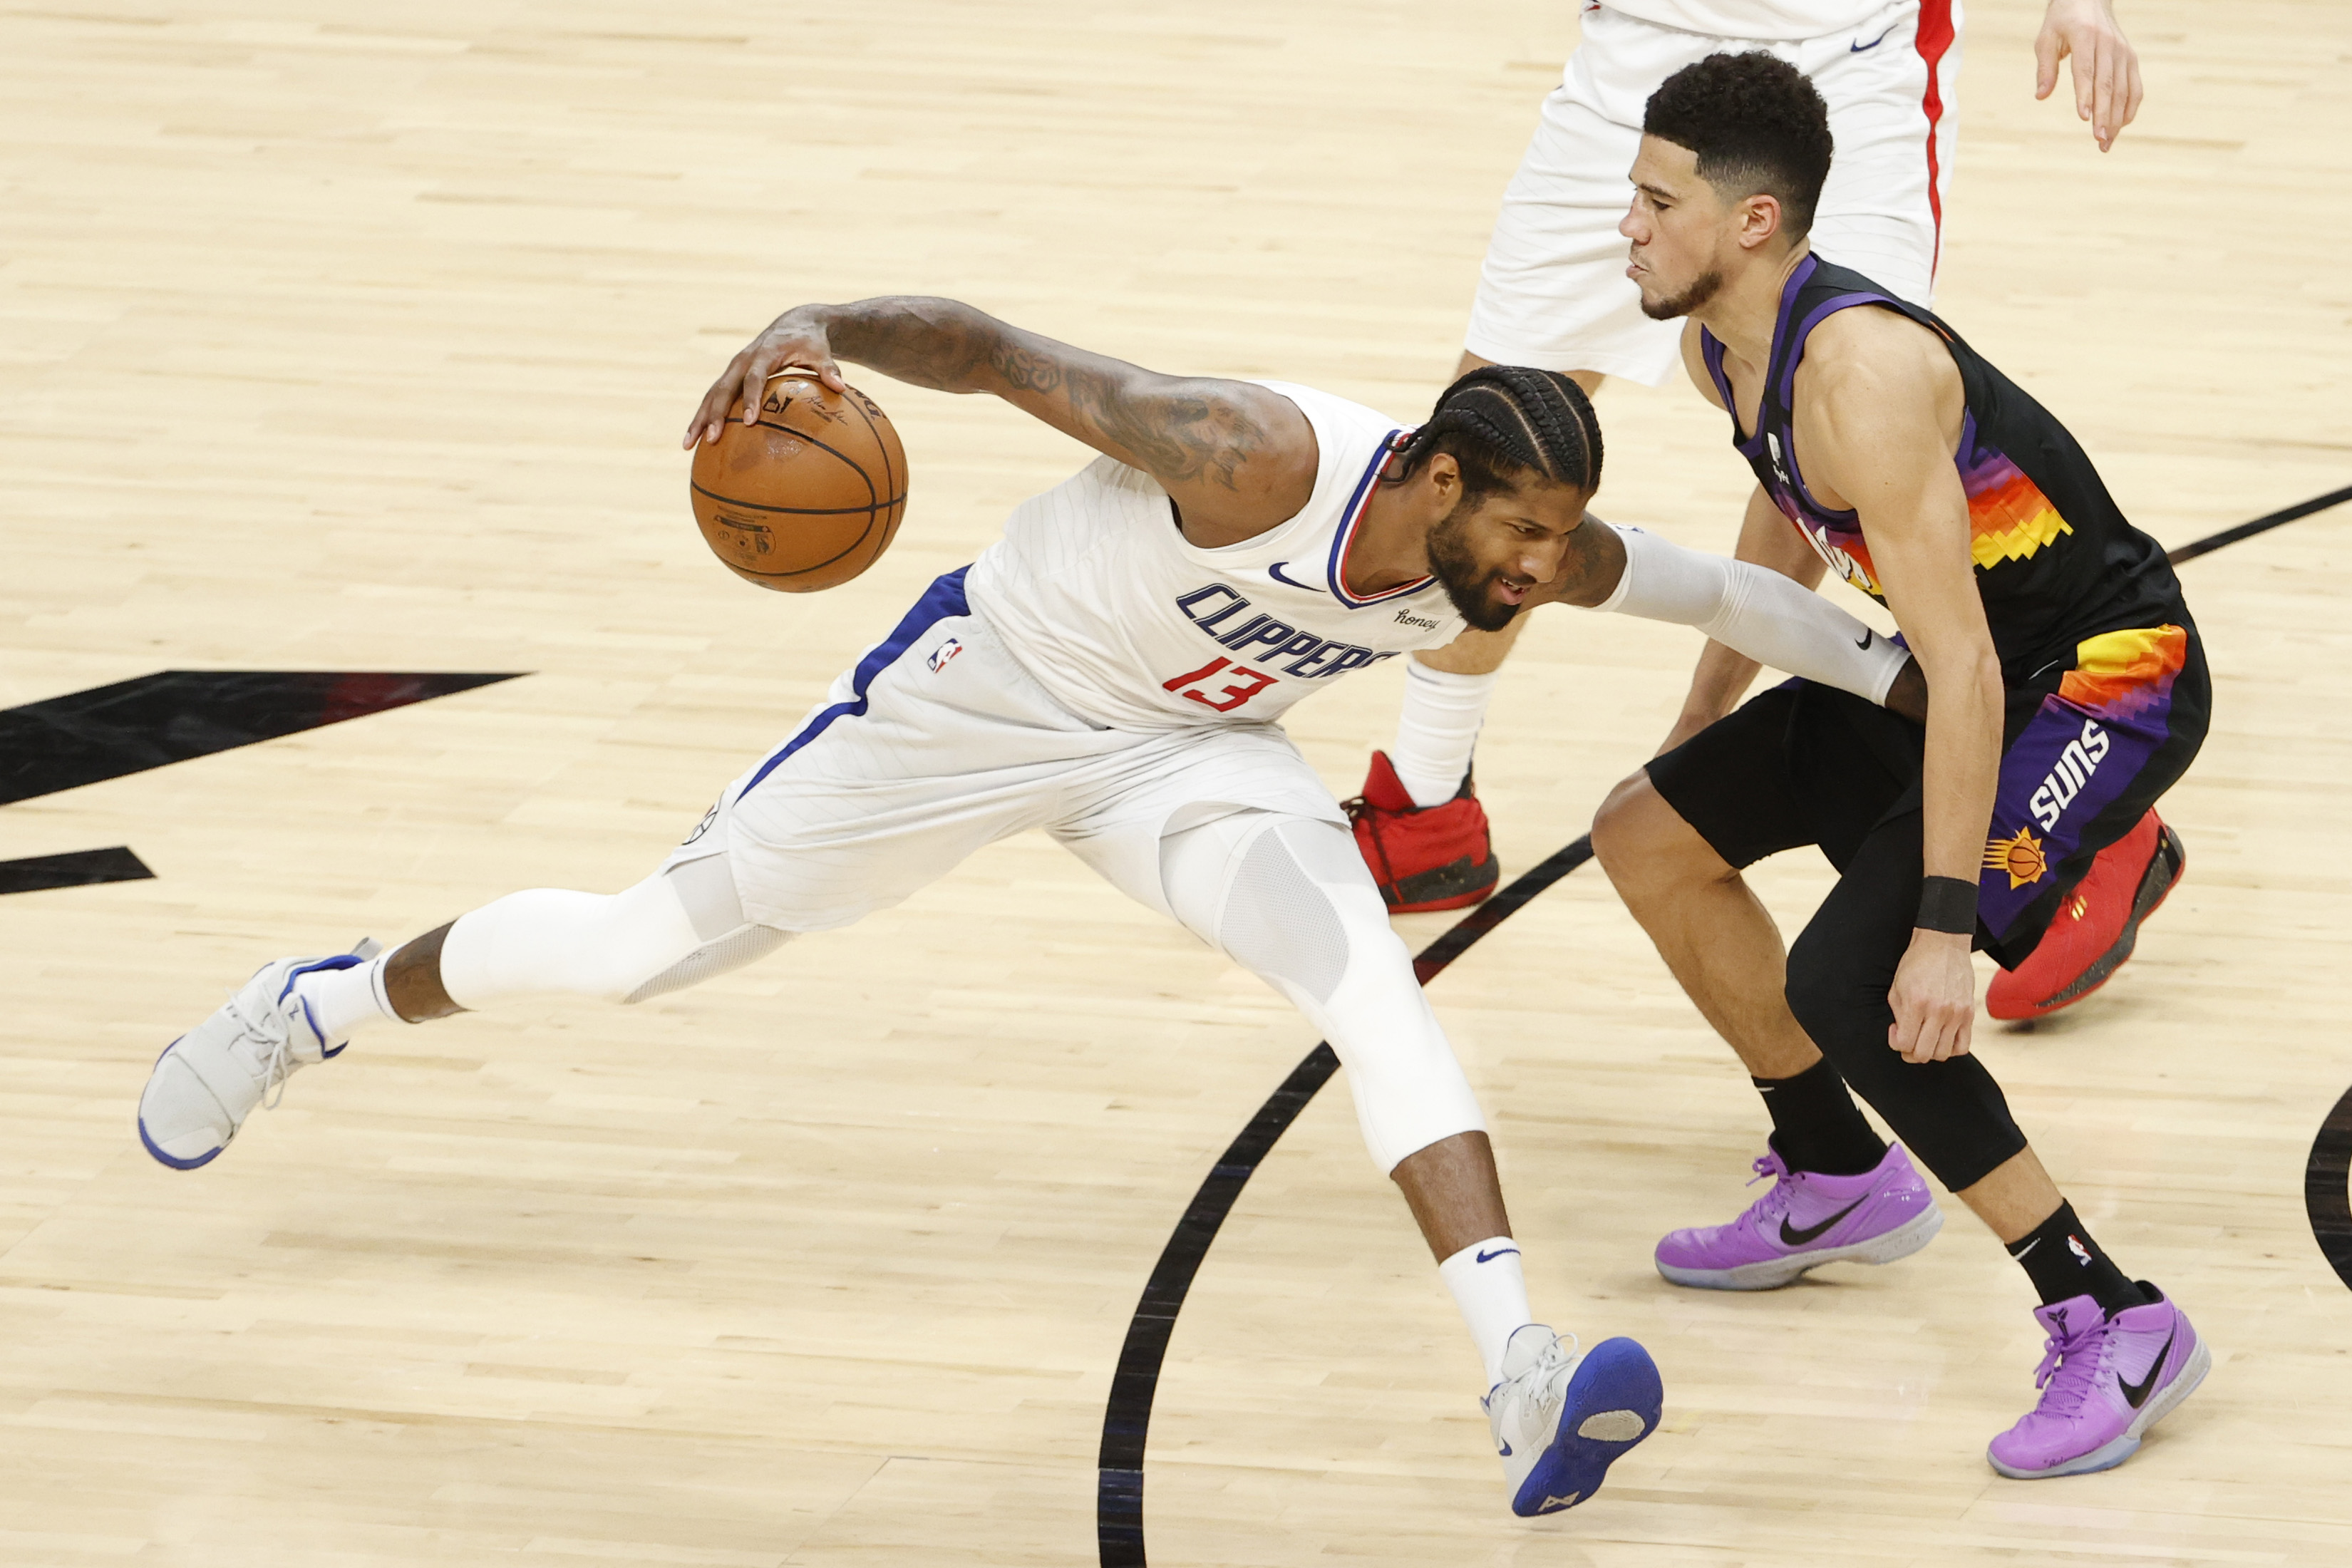 Los Angeles Clippers vs Phoenix Suns free live stream, Game 3 score, odds, time, TV channel, how to watch NBA playoffs online (6/24/21)